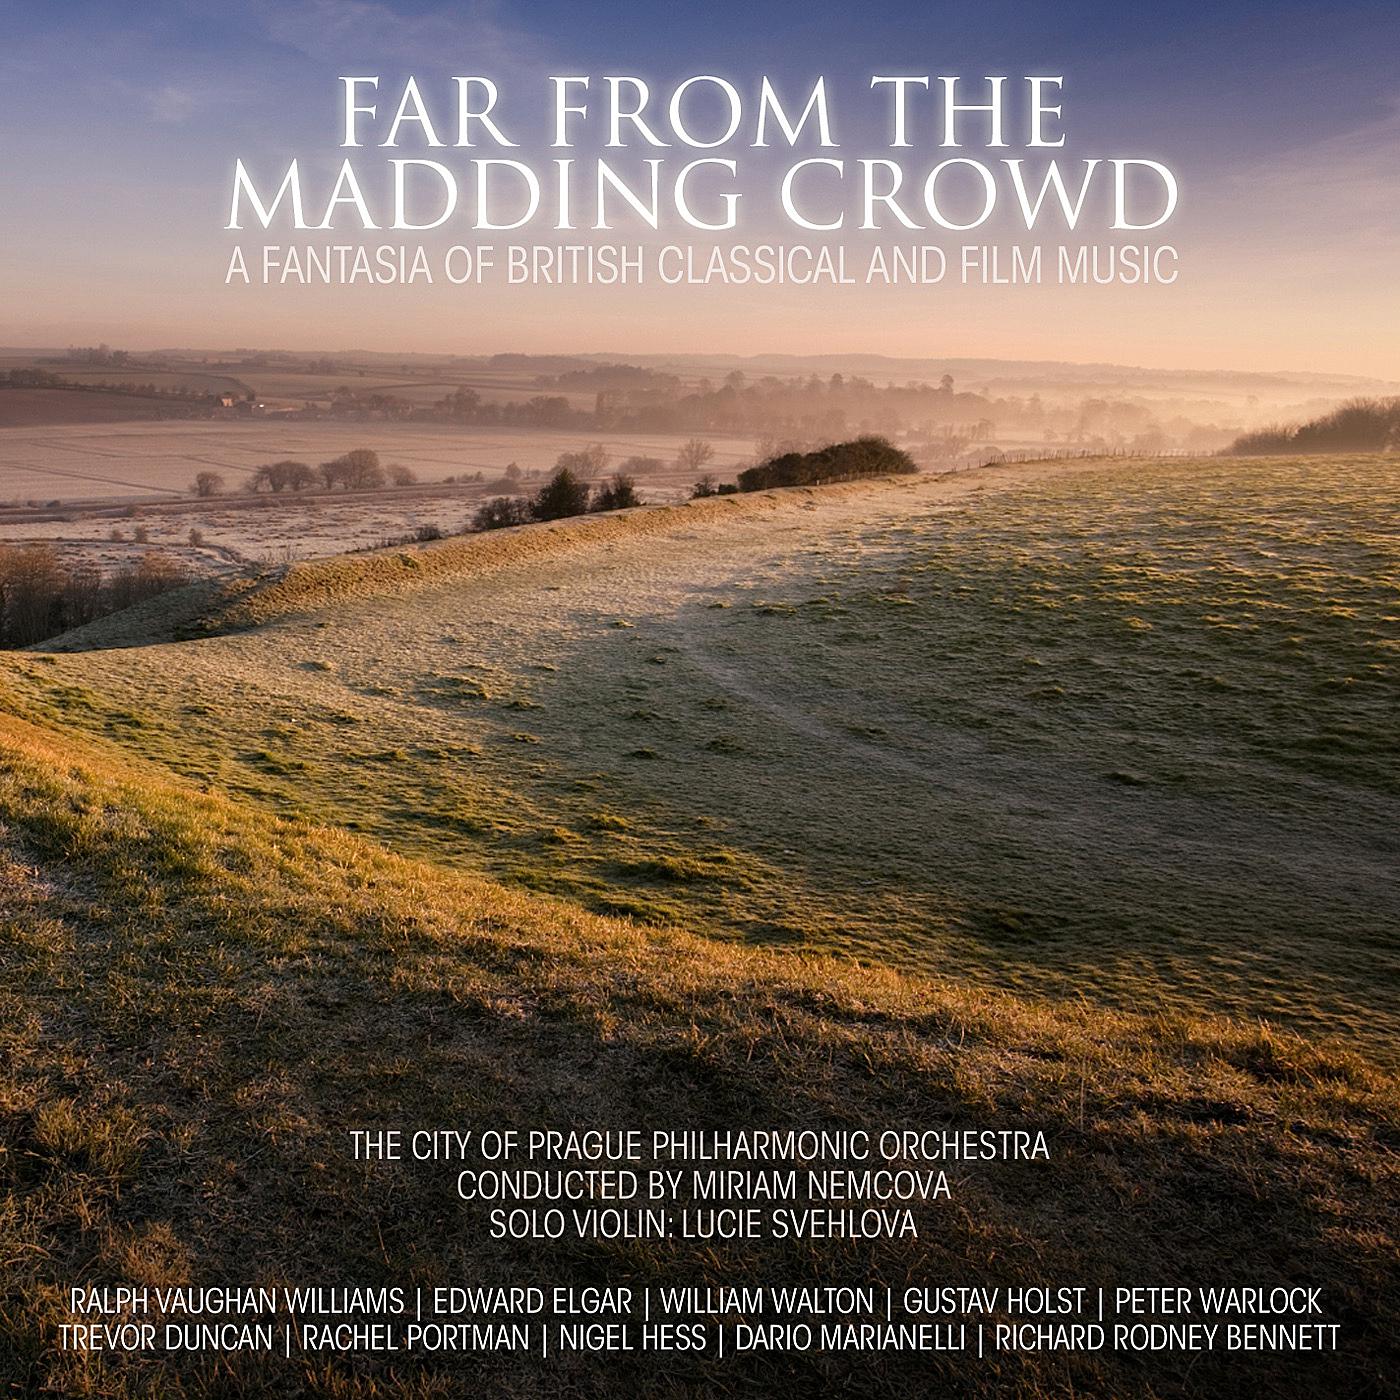 Far from the Madding Crowd - a Fantasia of British Classical and Film Music